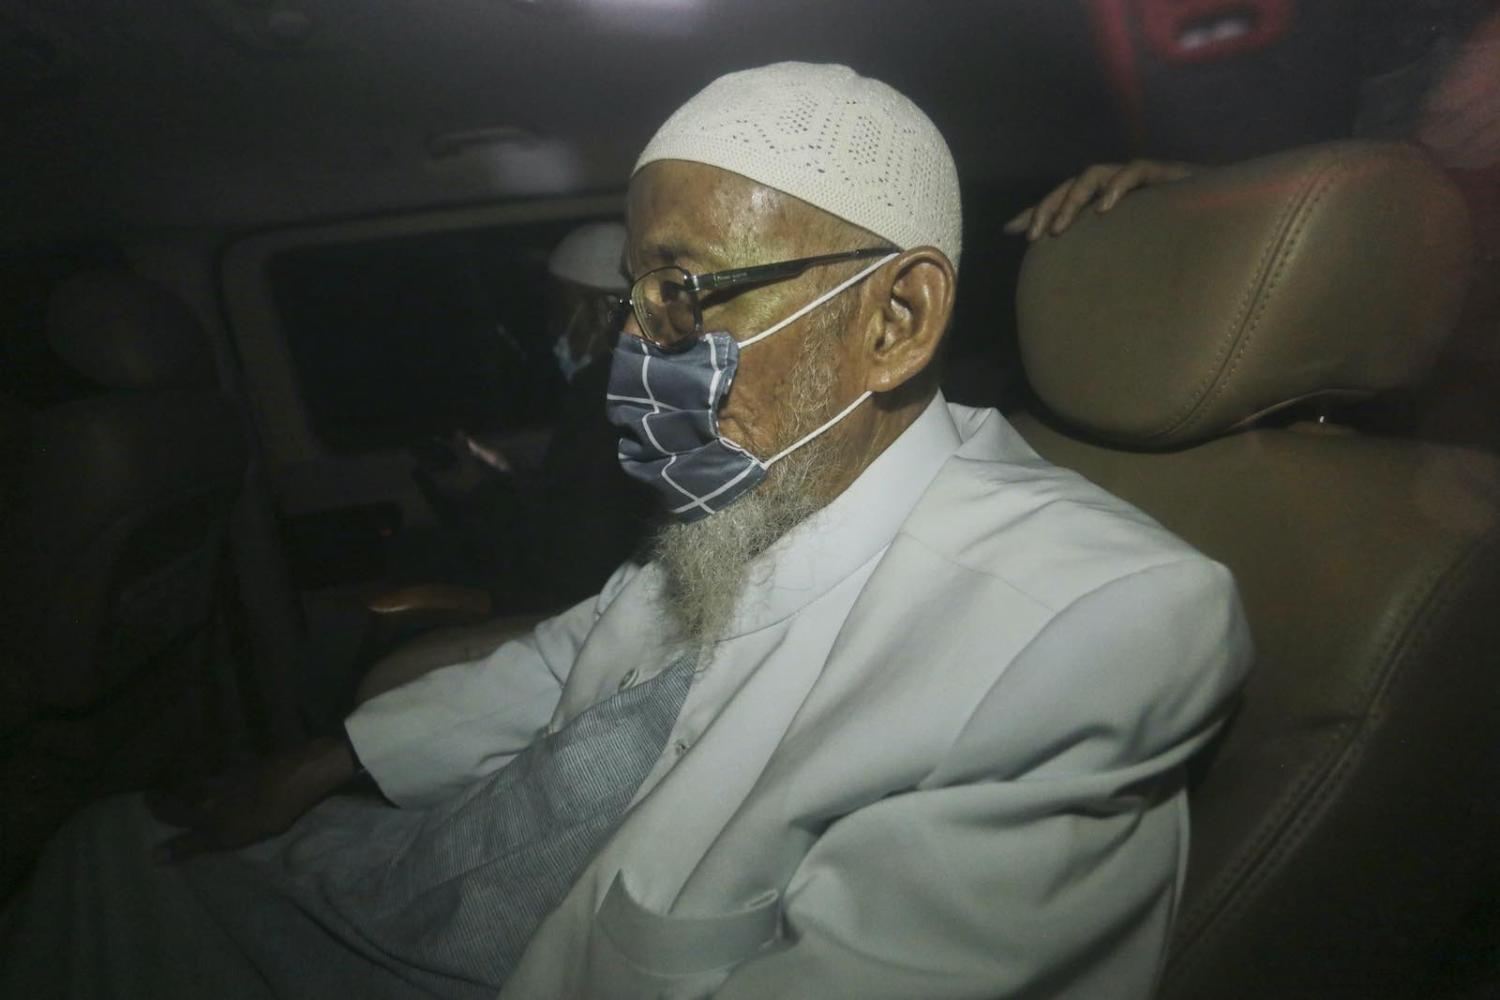 Abu Bakar Bashir is driven away from prison after his release on 8 January 2021 in Bogor, Indonesia (Photo by Getty Images)